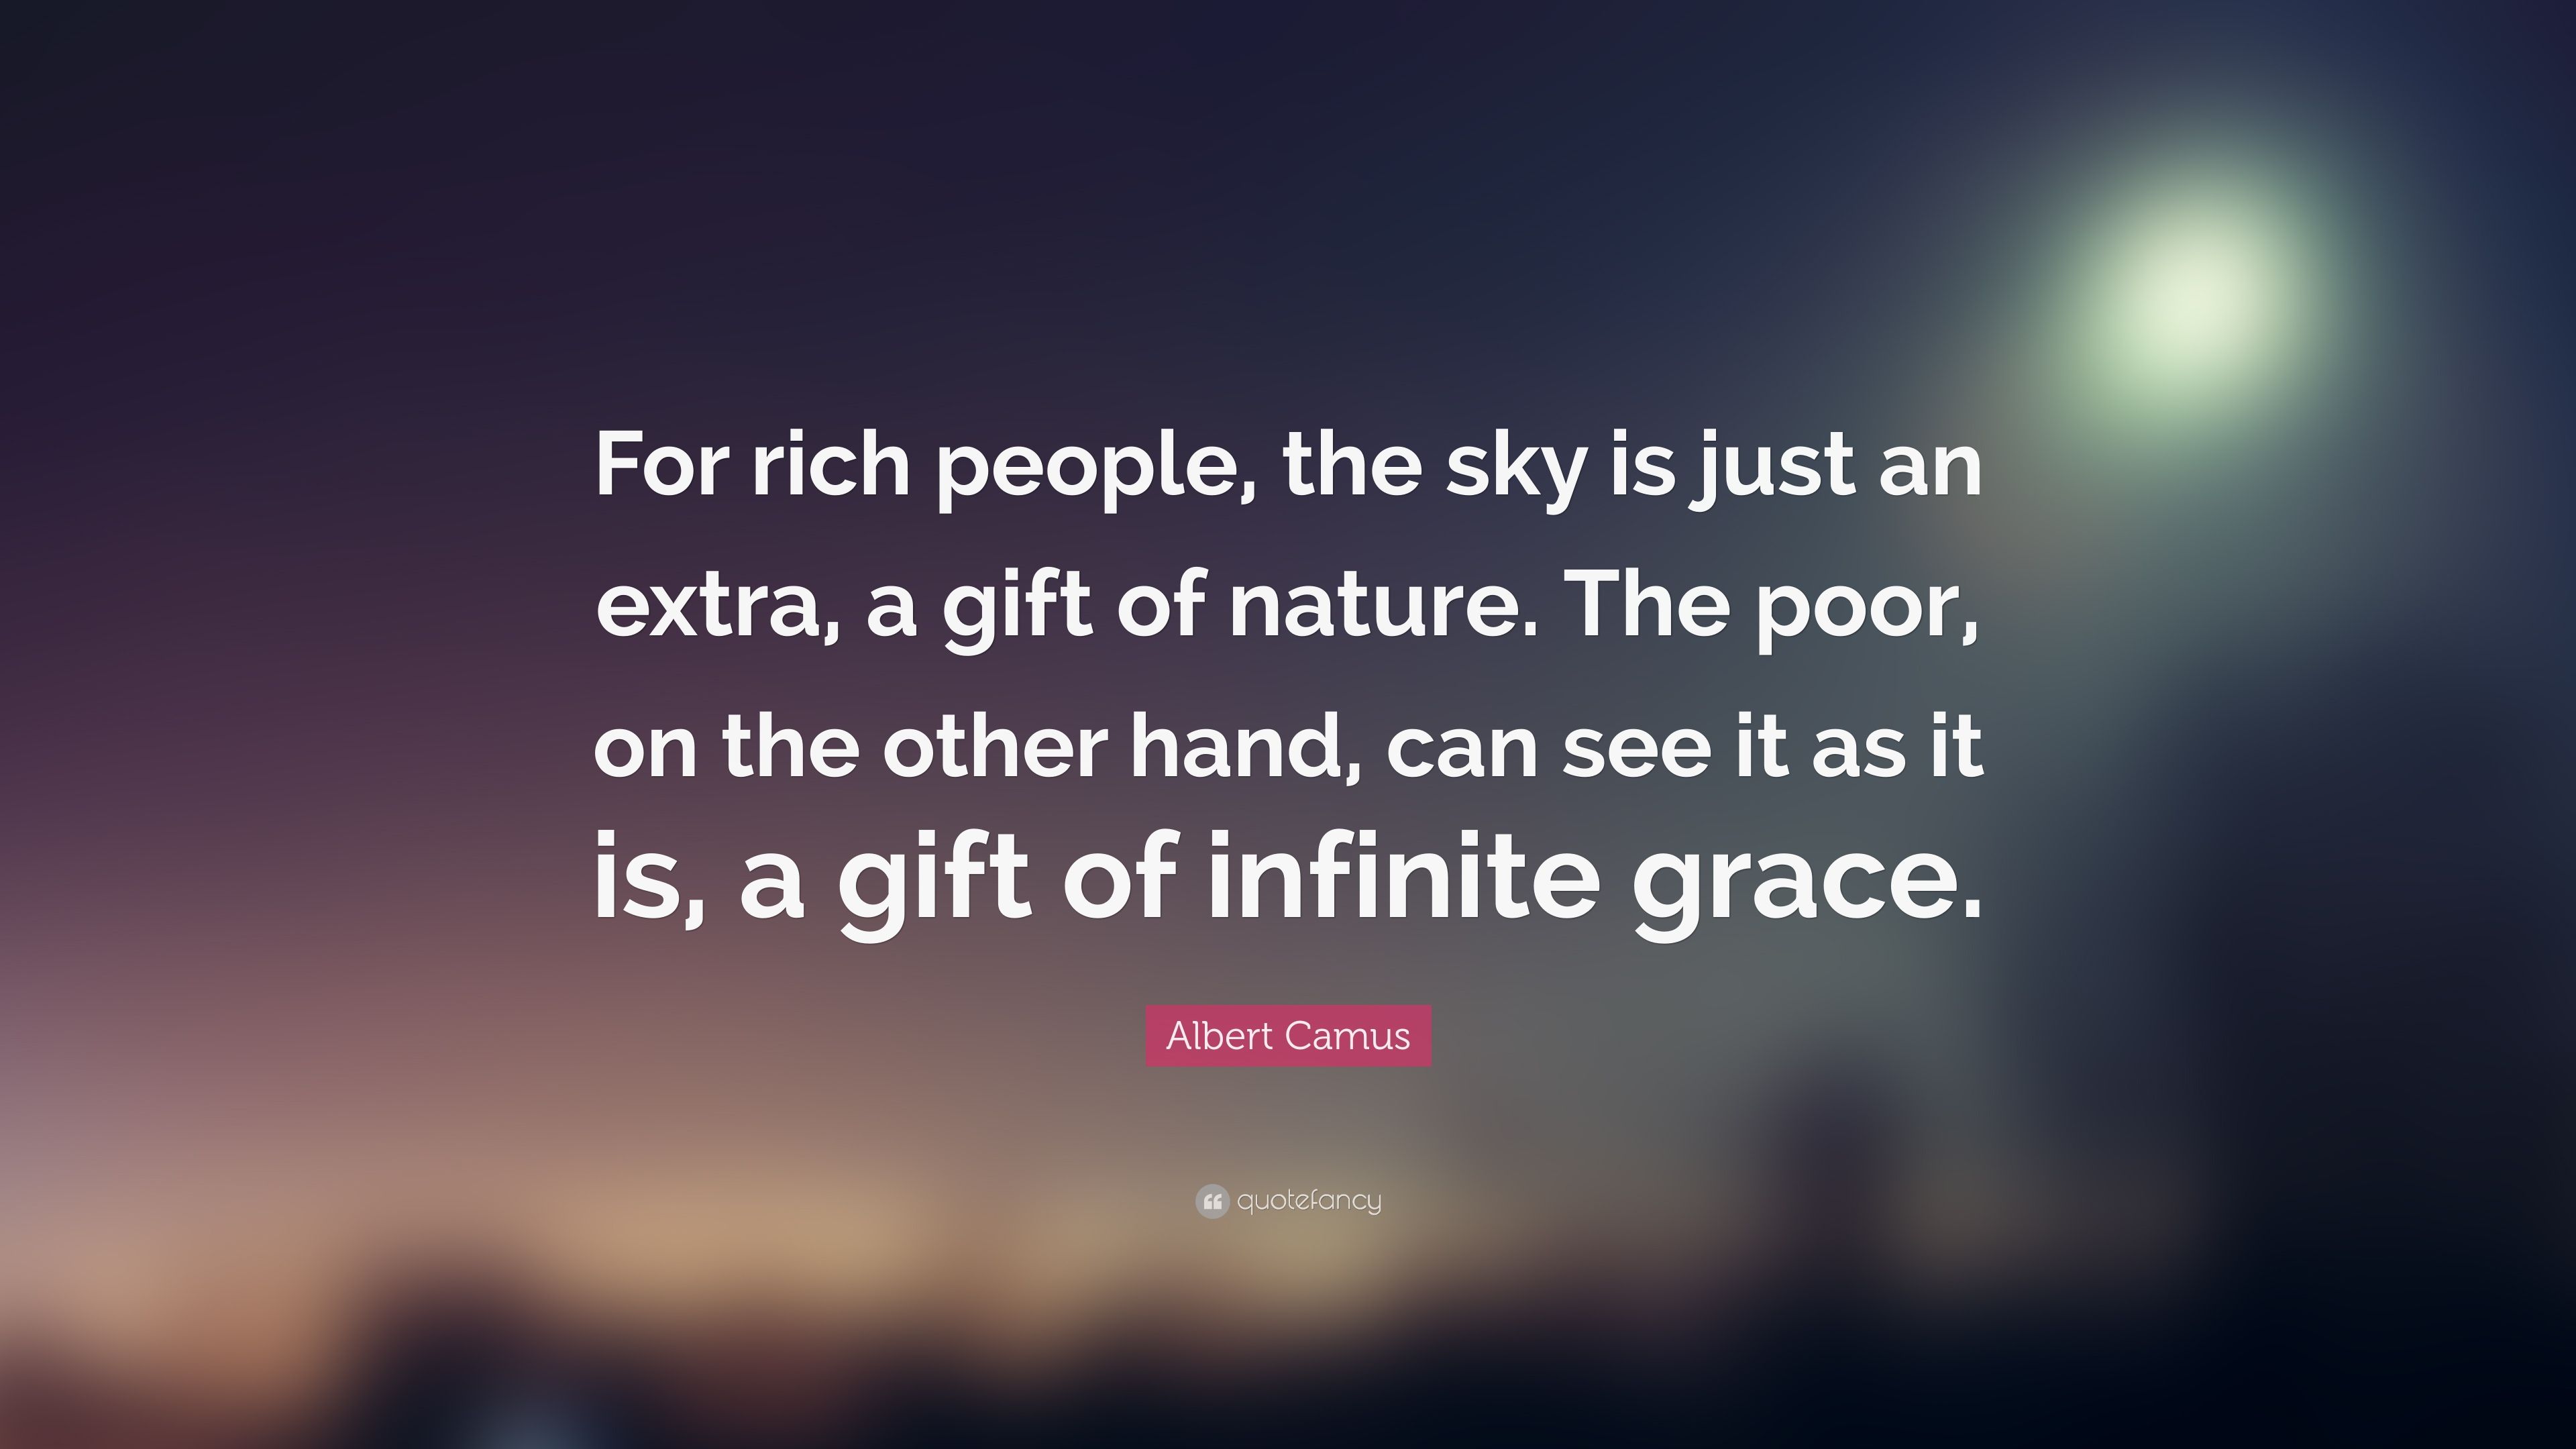 Albert Camus Quote: “For rich people, the sky is just an extra, a